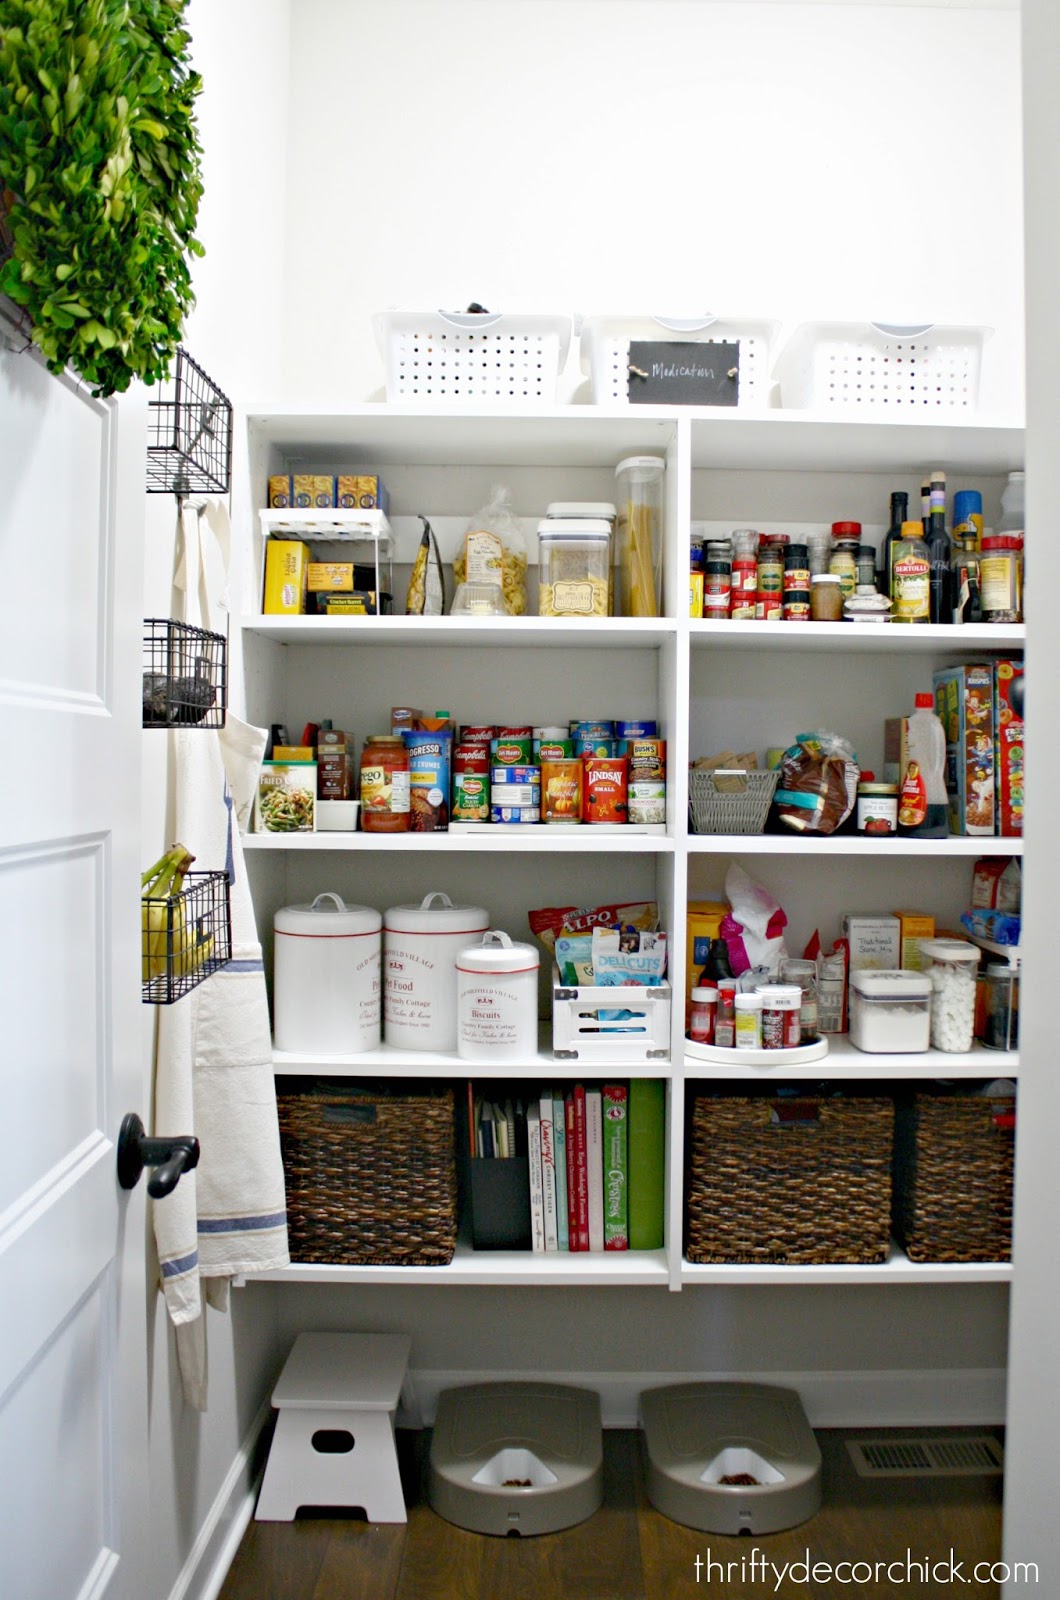 pantry with open shelves